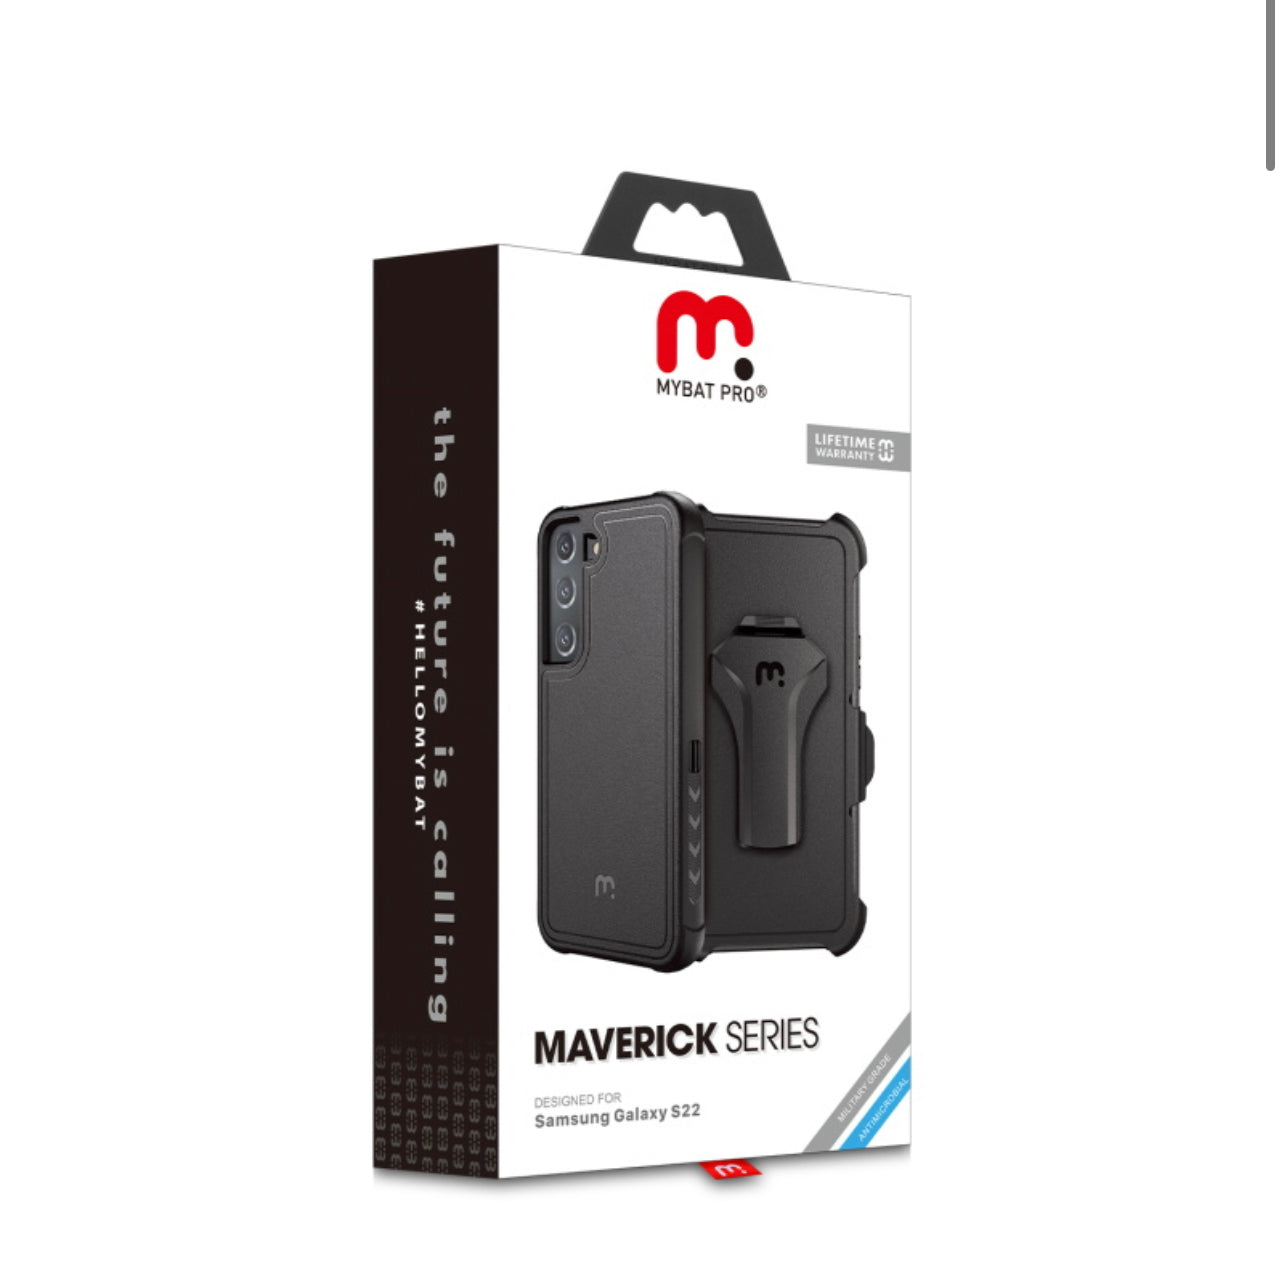 Maverick Series Case with Holster for Samsung Galaxy S22 - Black / Black